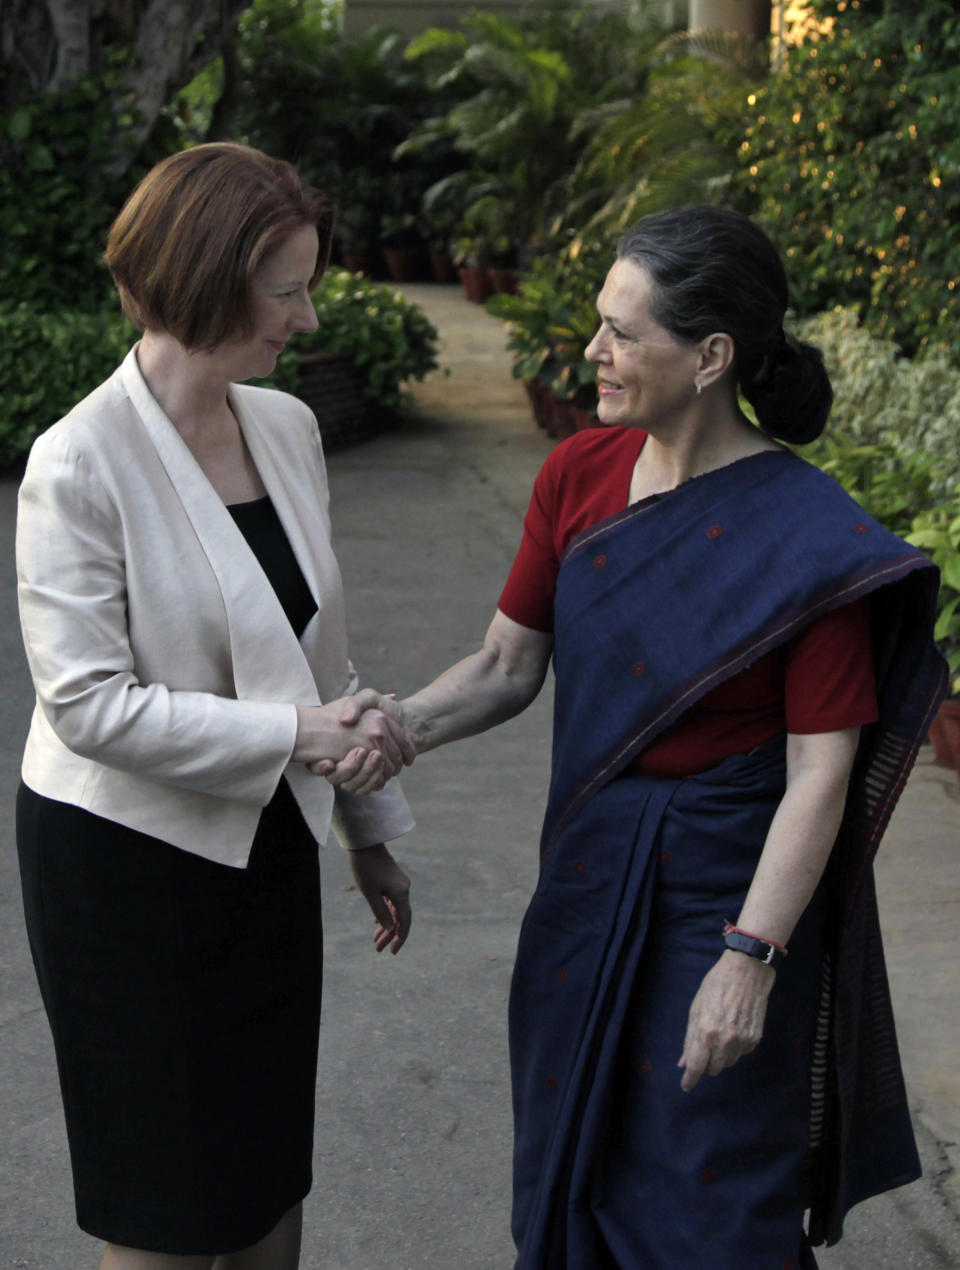 Australian Prime Minister Julia Gillard, left, shakes hands with India's Congress Party president Sonia Gandhi, at the latter's residence before a meeting in New Delhi, India, Wednesday, Oct. 17, 2012. India and Australia began talks Wednesday to strengthen economic and strategic ties and explore cooperation in civilian nuclear energy. (AP Photo/ Mustafa Quraishi)